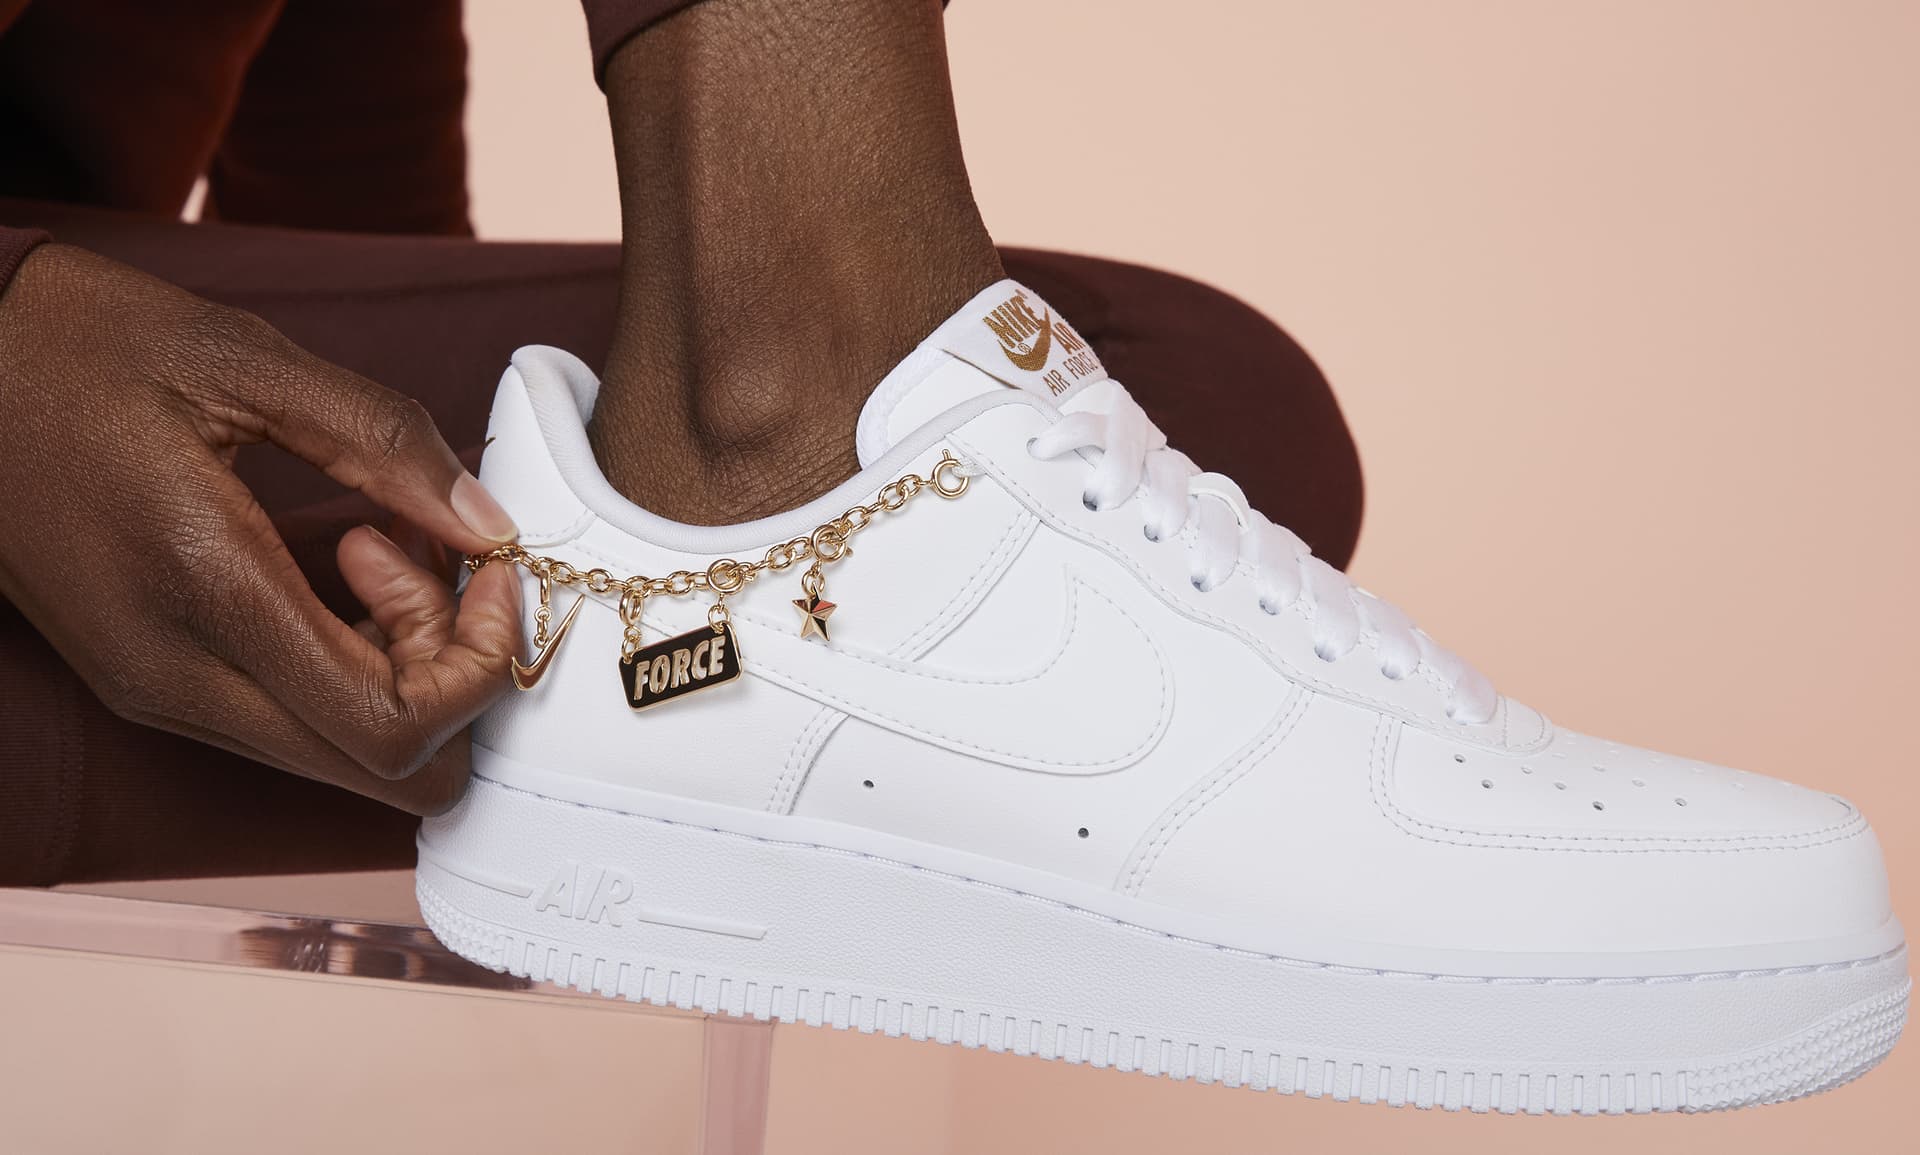 Women's Nike Air Force 1 '07 LX Low - White